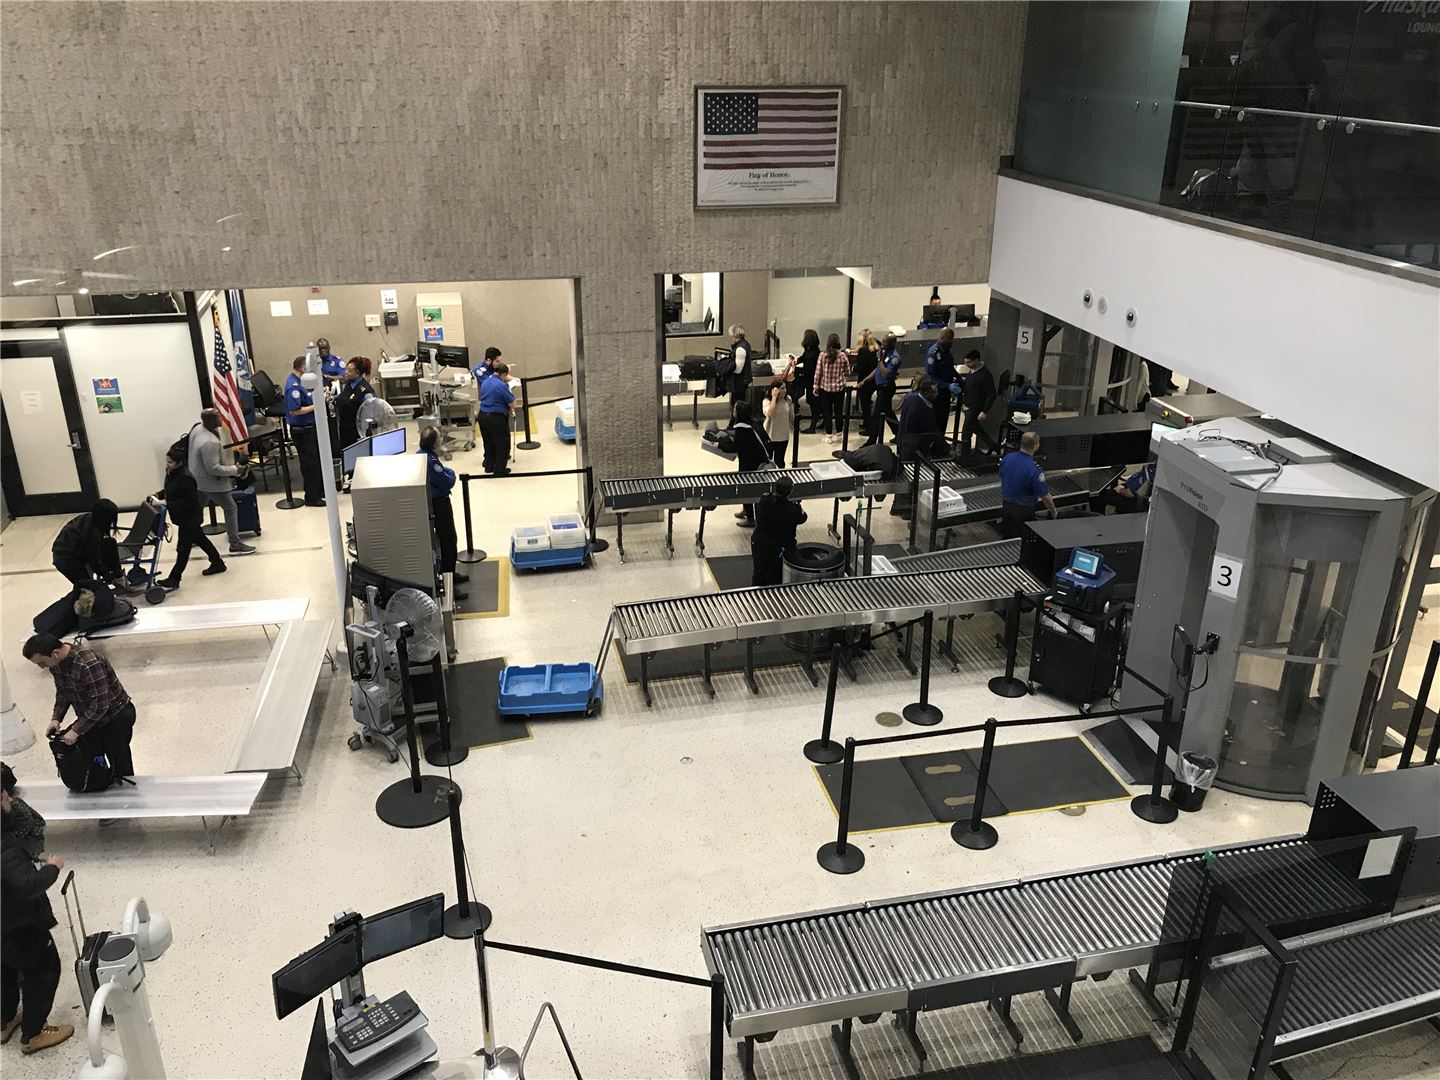 TSA’s New 3D Scanners Will Let Travelers Keep Laptops in Carry-On Bags